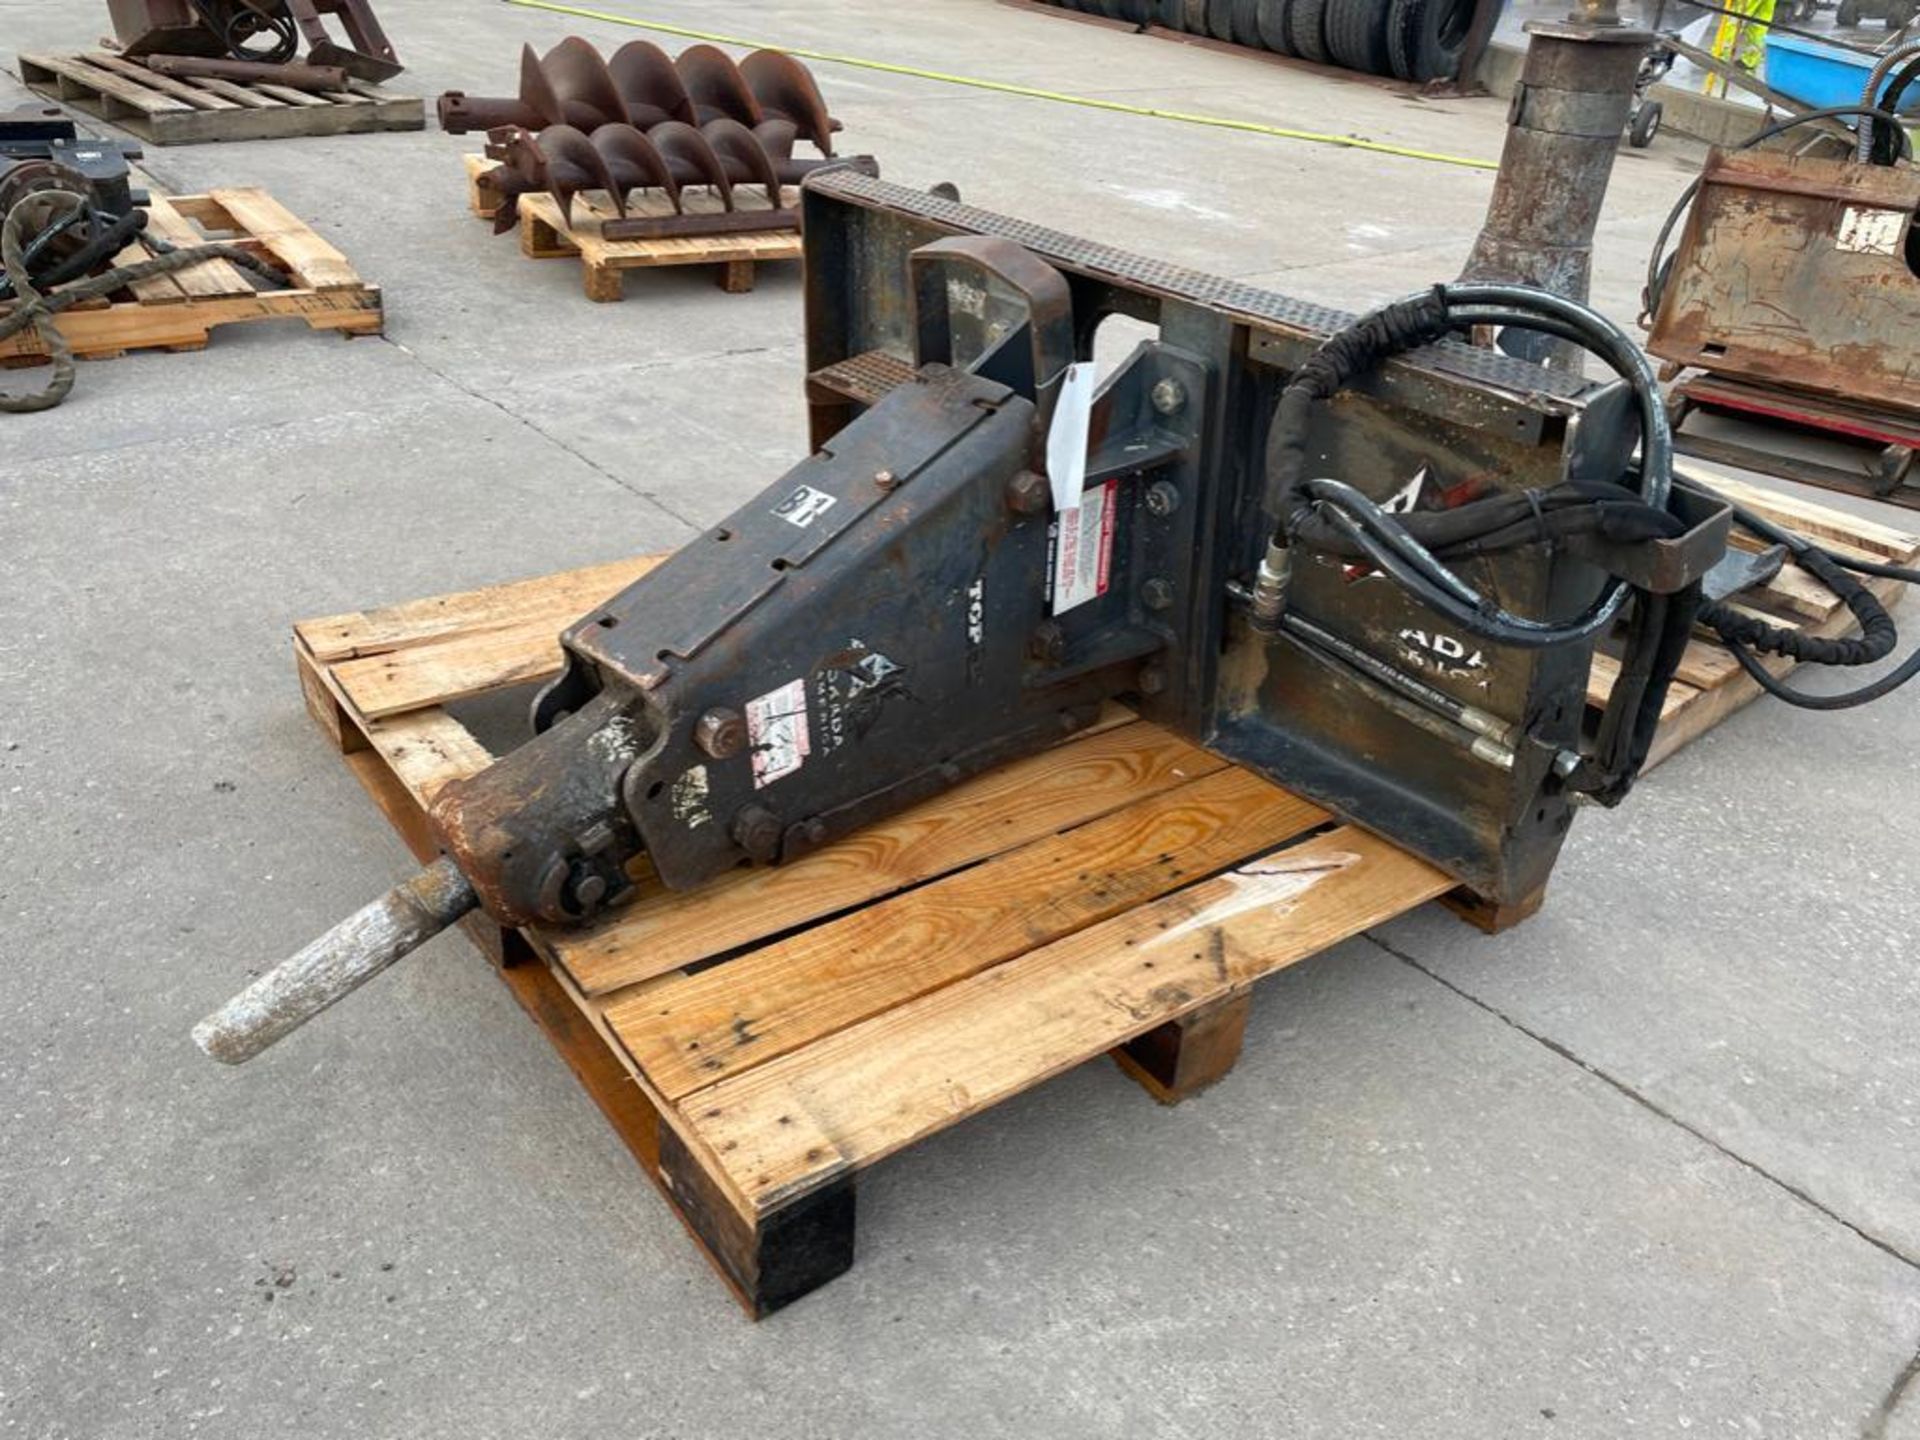 TOP 35V Skid Steer Hammer Breaker Attachment. Located in Hazelwood, MO